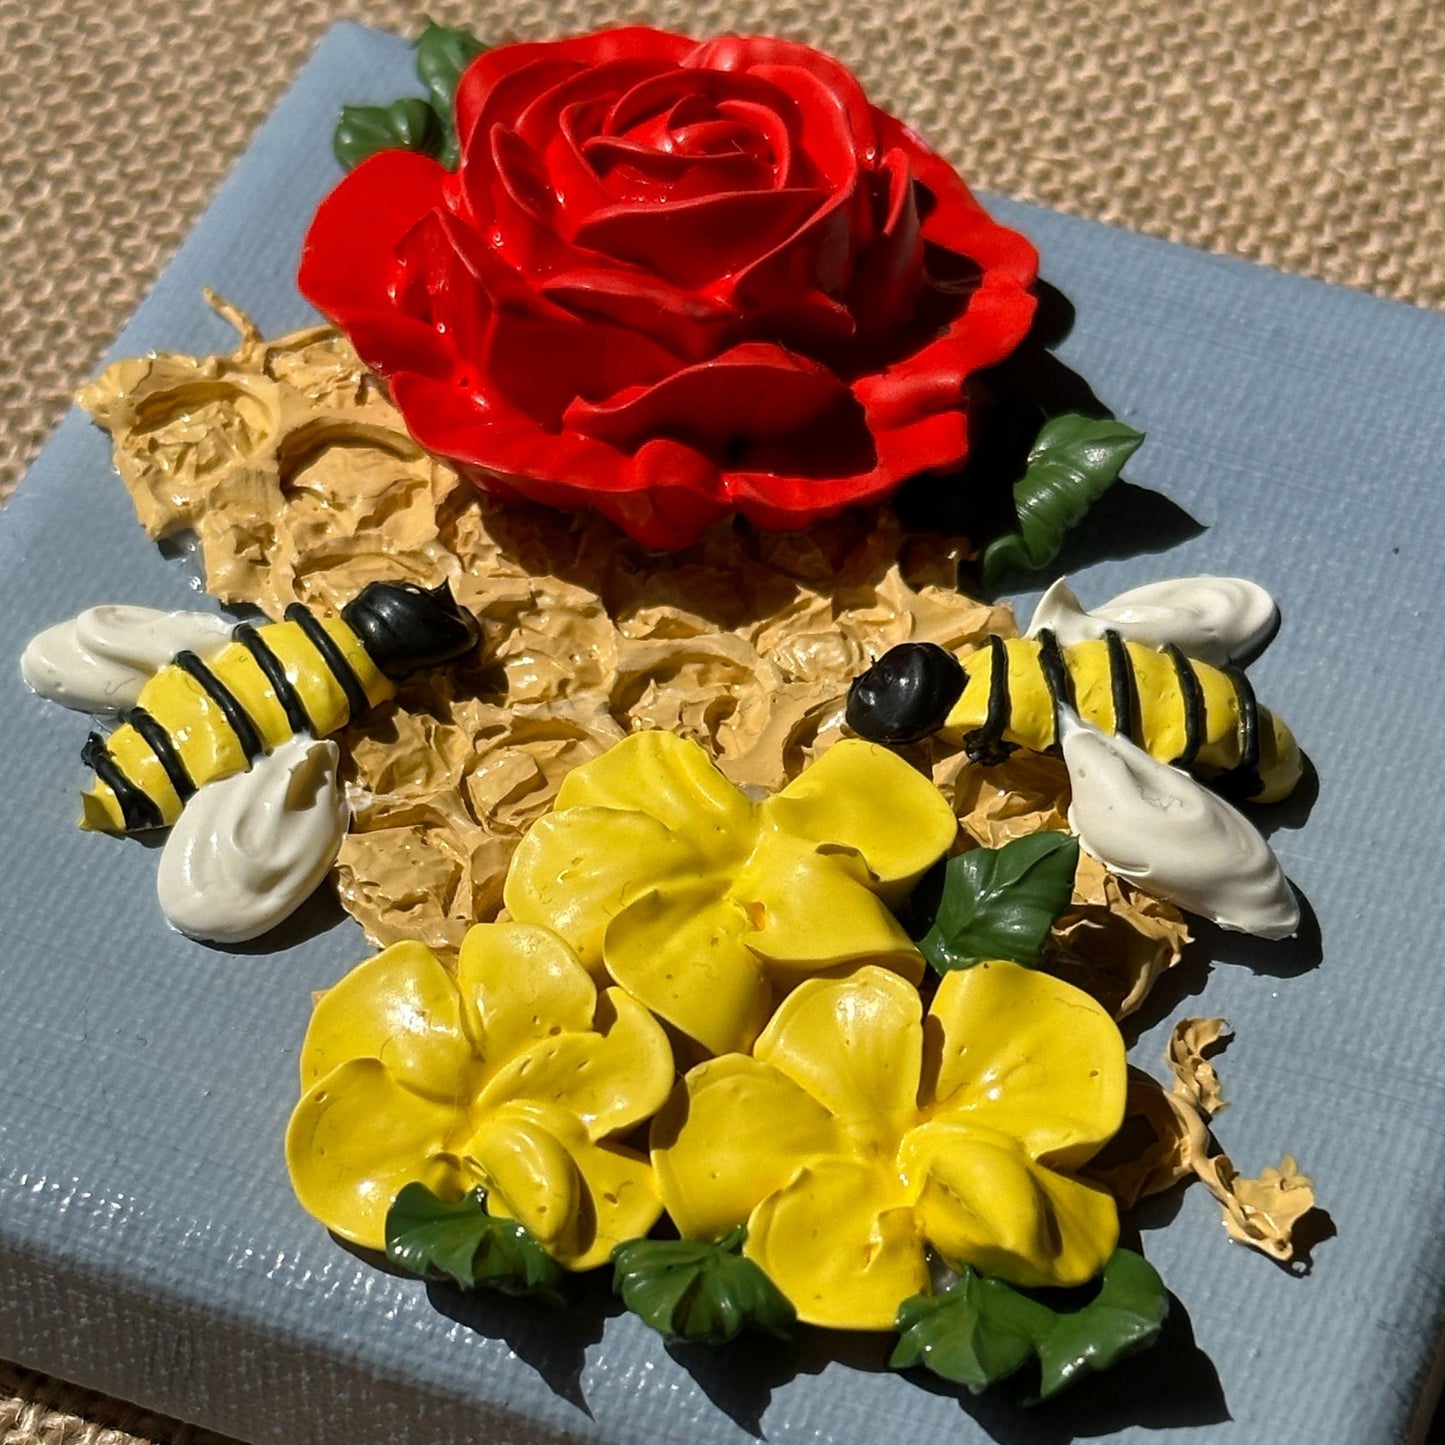 3d Bees And Flowers on Blue Canvas 4"x4"